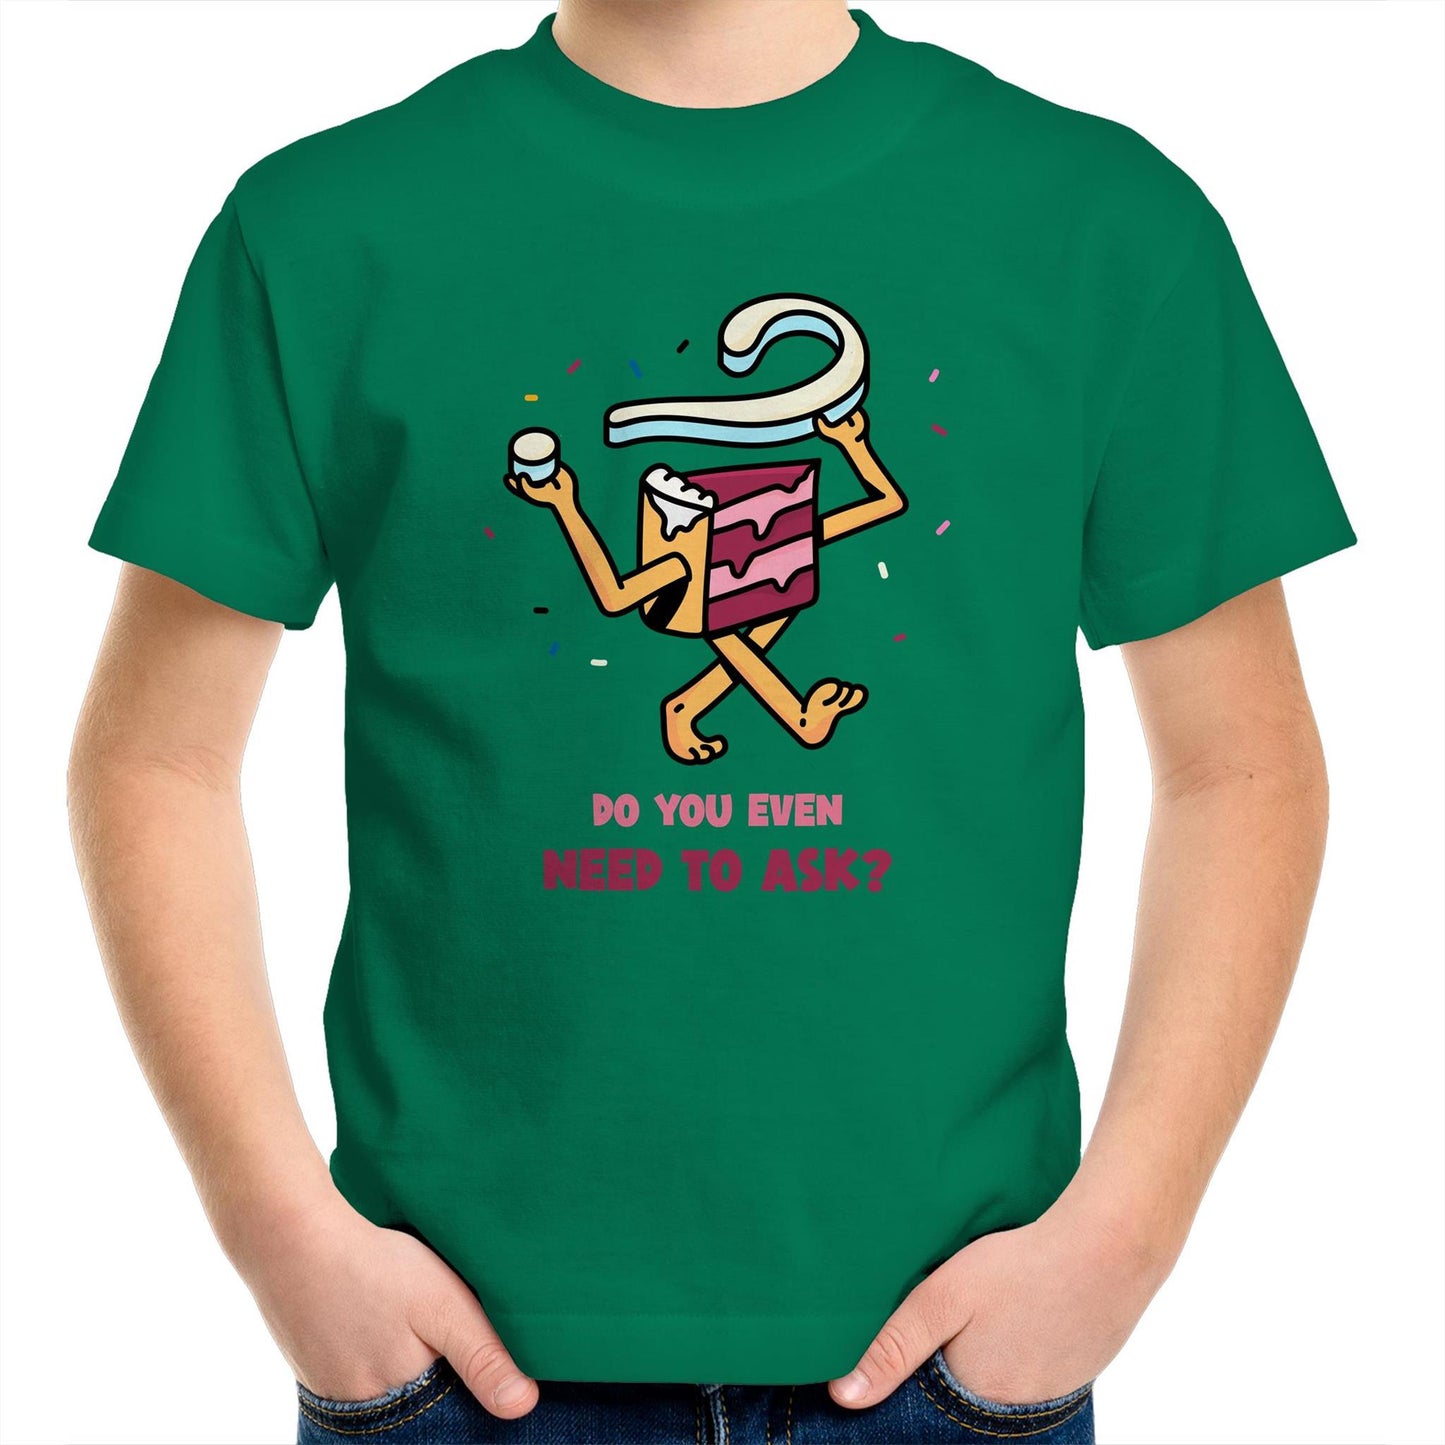 Cake, Do You Even Need To Ask - Kids Youth Crew T-Shirt Kelly Green Kids Youth T-shirt